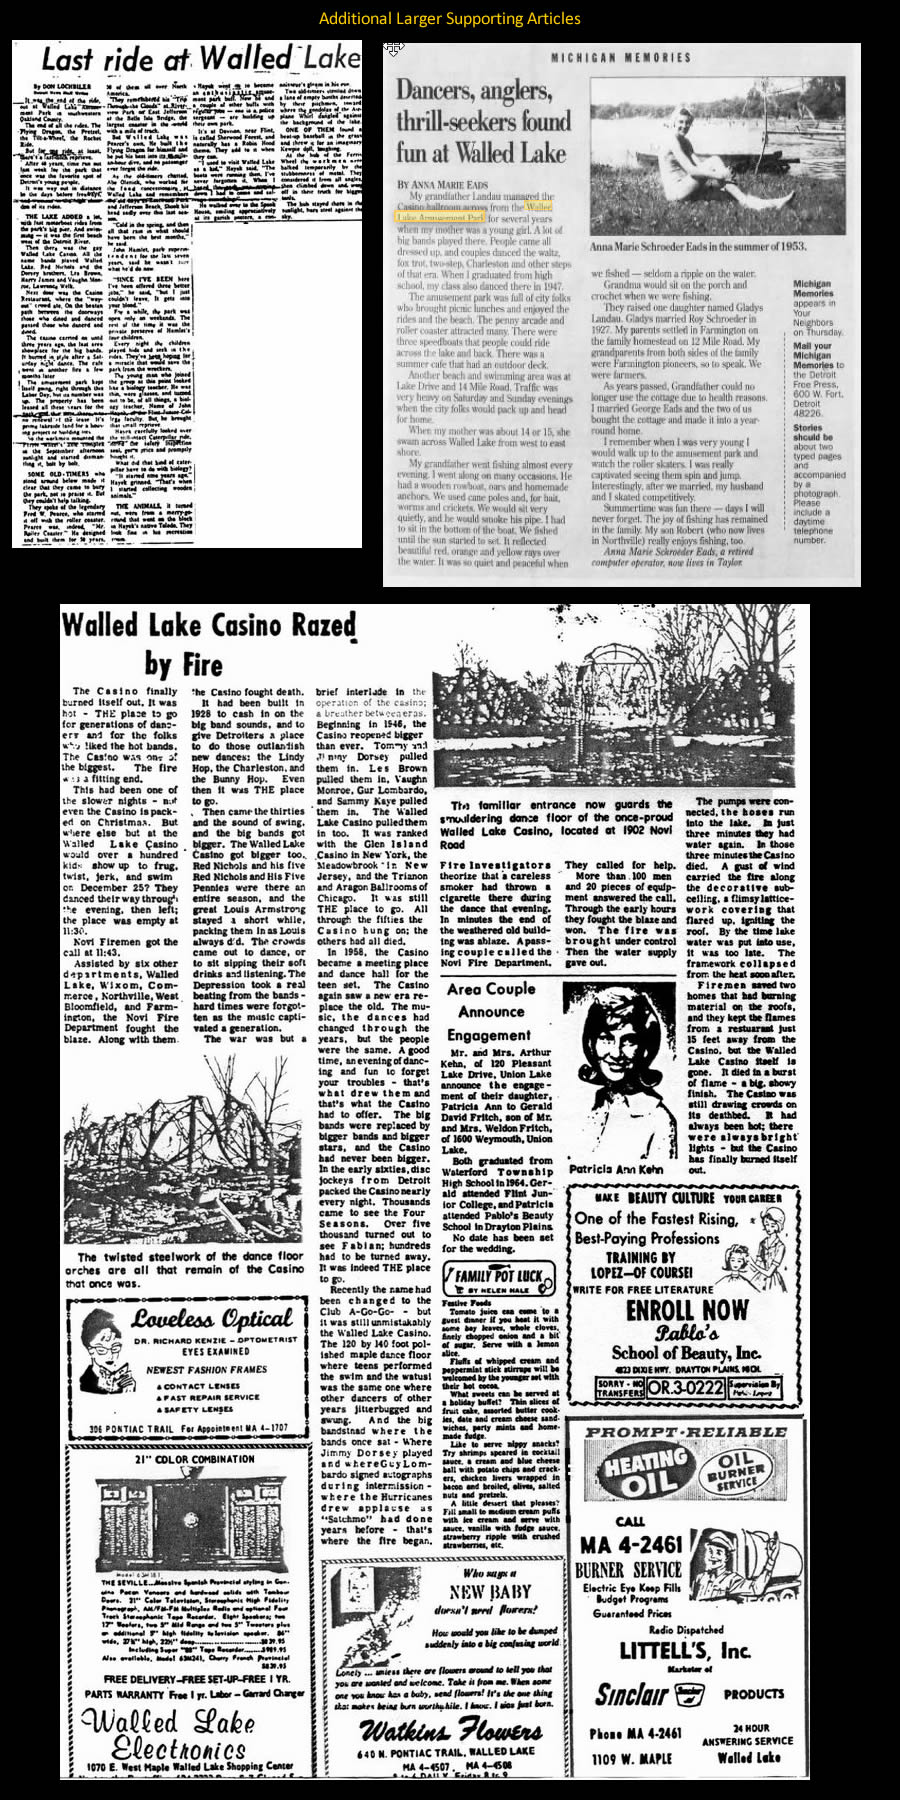 Walled Lake Amusement Park - SUPPORTING ARTICLES